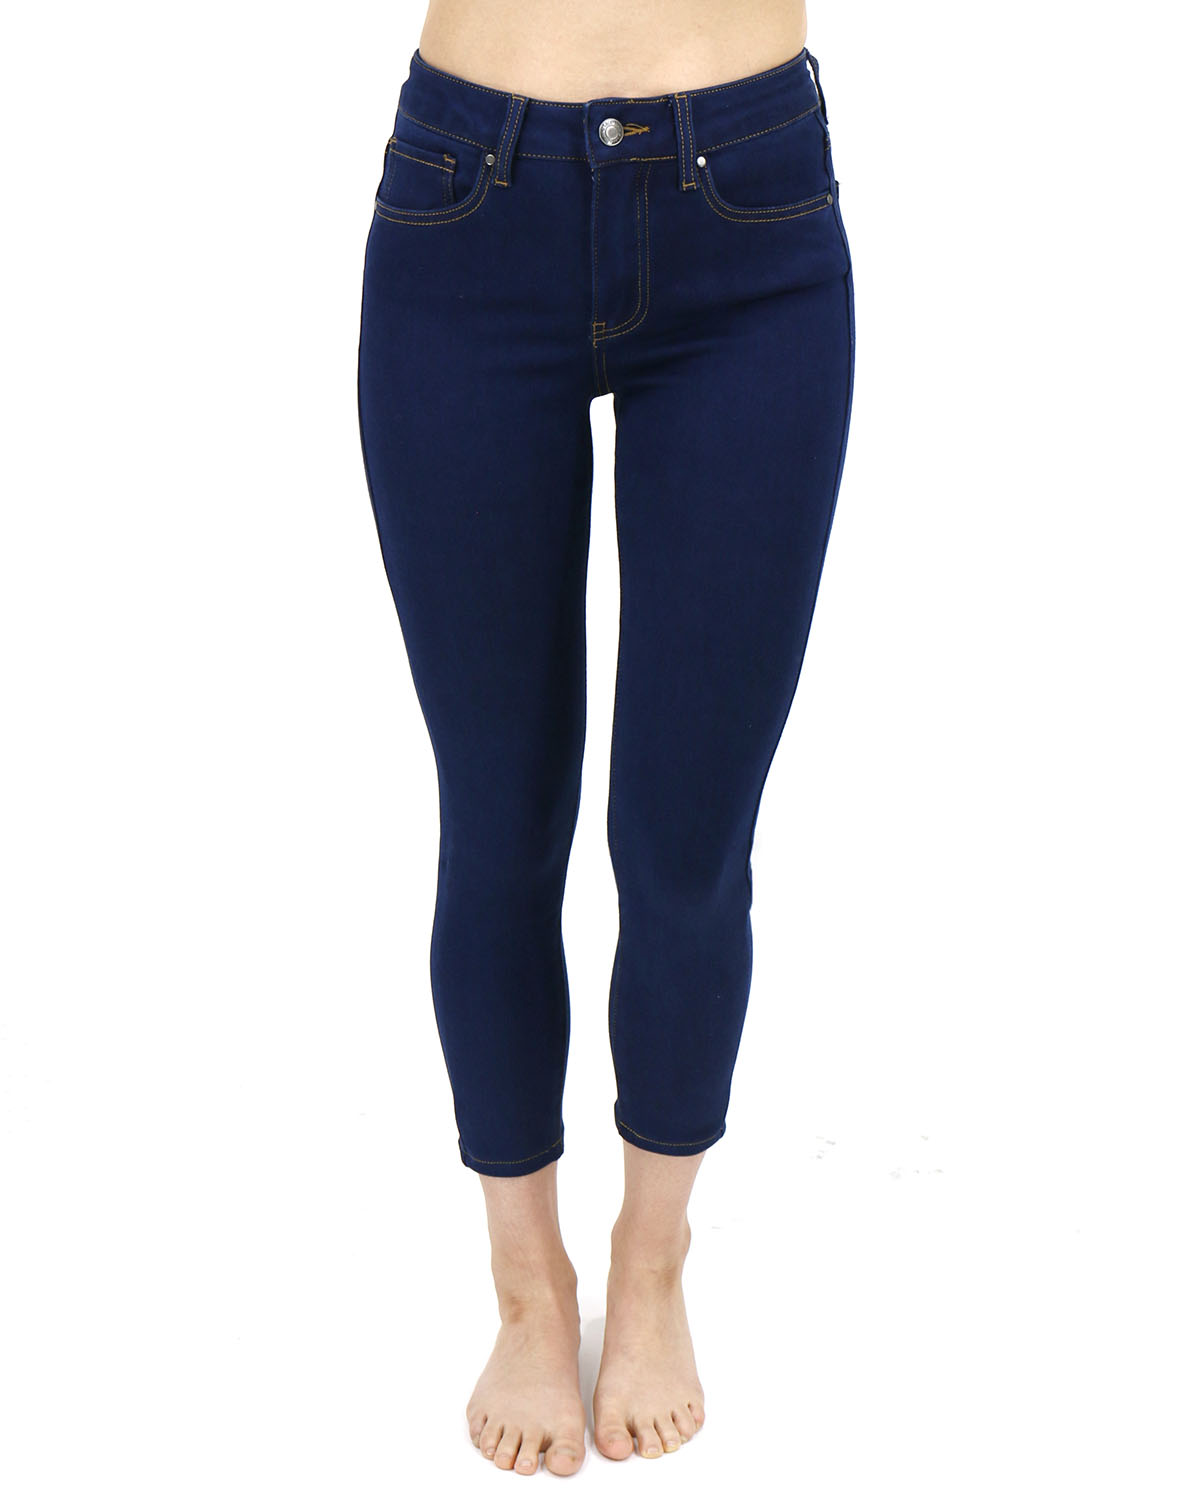 Cropped All Day Denim in Dark Indigo - FINAL SALE - Grace and Lace